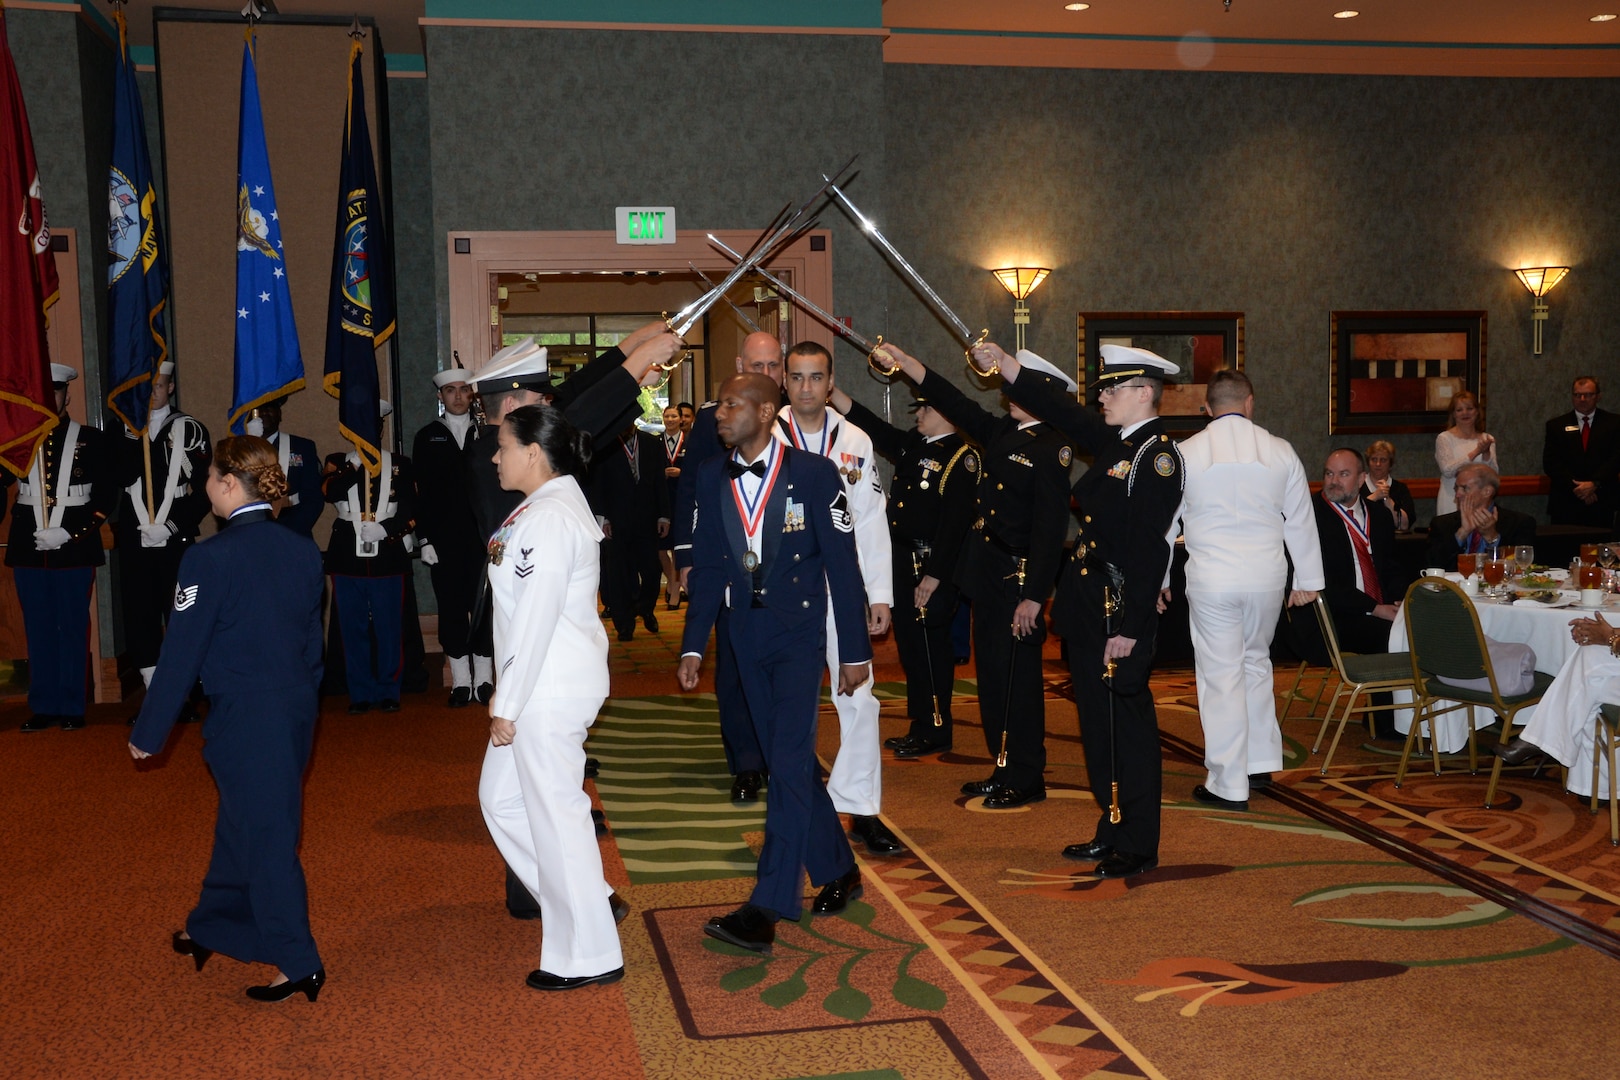 Nominees enter the ball room during the 2015 U.S. Strategic Command (USSTRATCOM) Annual Awards ceremony, Omaha, Neb., May 13, 2016. More than 80 nominees, military members and civilians, from USSTRATCOM's headquarters, functional components and task forces attended the ceremony after being recognized within their respective units for outstanding support to the command's global strategic missions. Prior to the award presentations, each nominee was recognized during a medallion presentation ceremony. One of nine DoD unified combatant commands, USSTRATCOM has global strategic missions, assigned through the Unified Command Plan, which include strategic deterrence; space operations; cyberspace operations; joint electronic warfare; global strike; missile defense; intelligence, surveillance and reconnaissance; combating weapons of mass destruction; and analysis and targeting. (USSTRATCOM photo by Steve Cunningham)